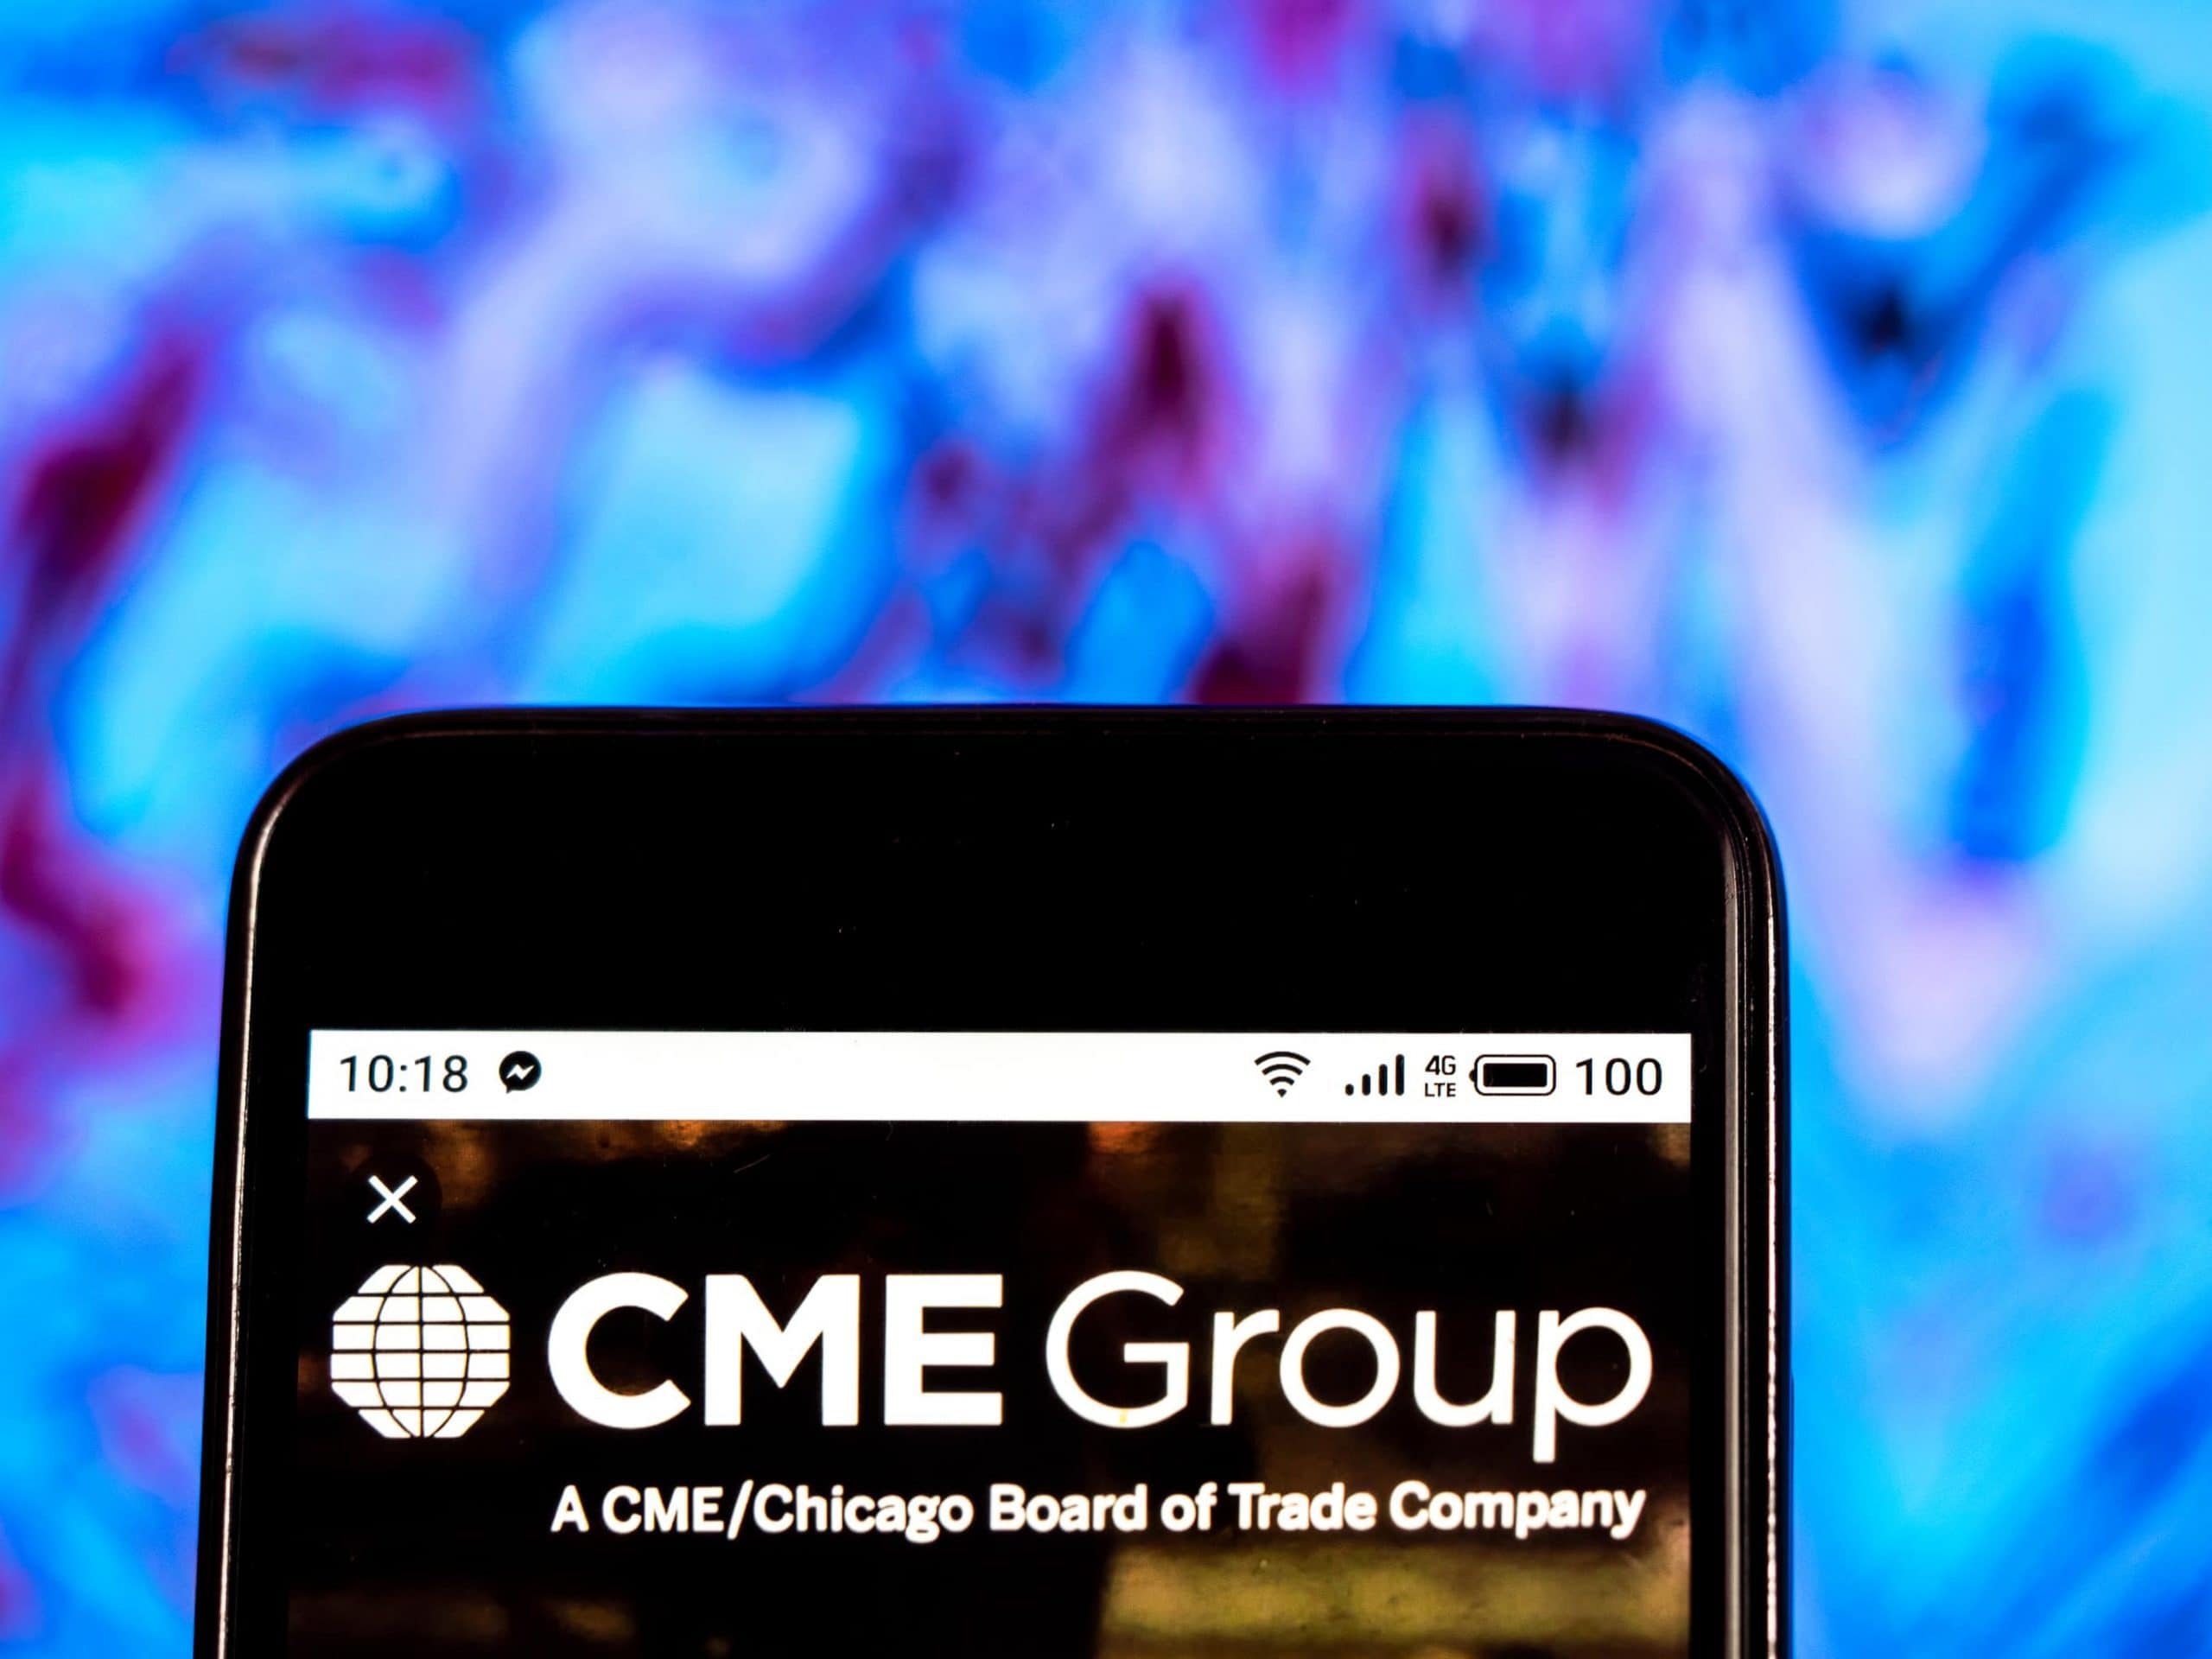 Google is investing $ 1 billion in the CME Group